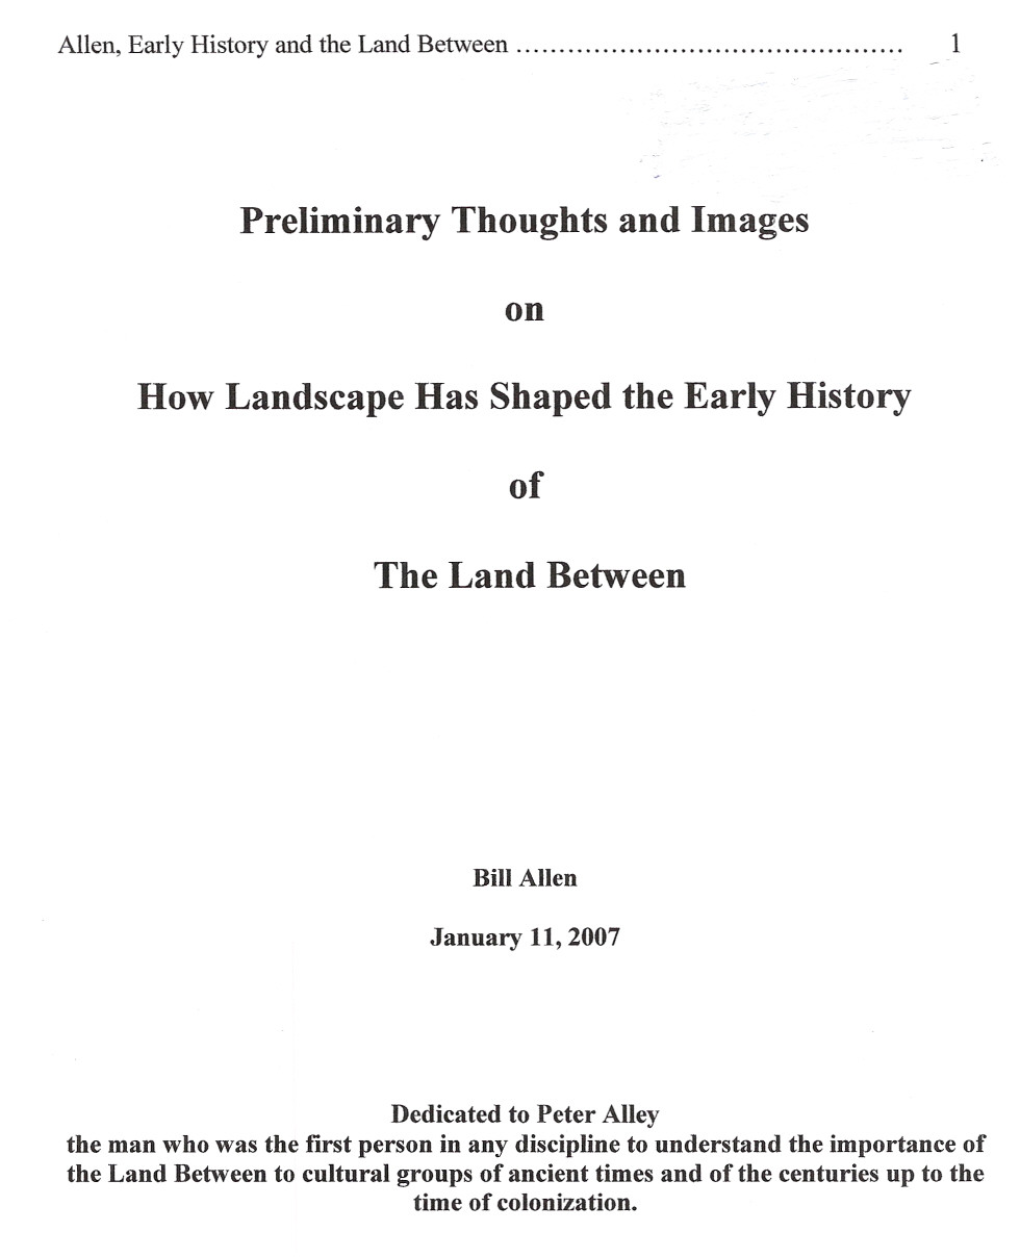 How Landscape Has Shaped the Early History